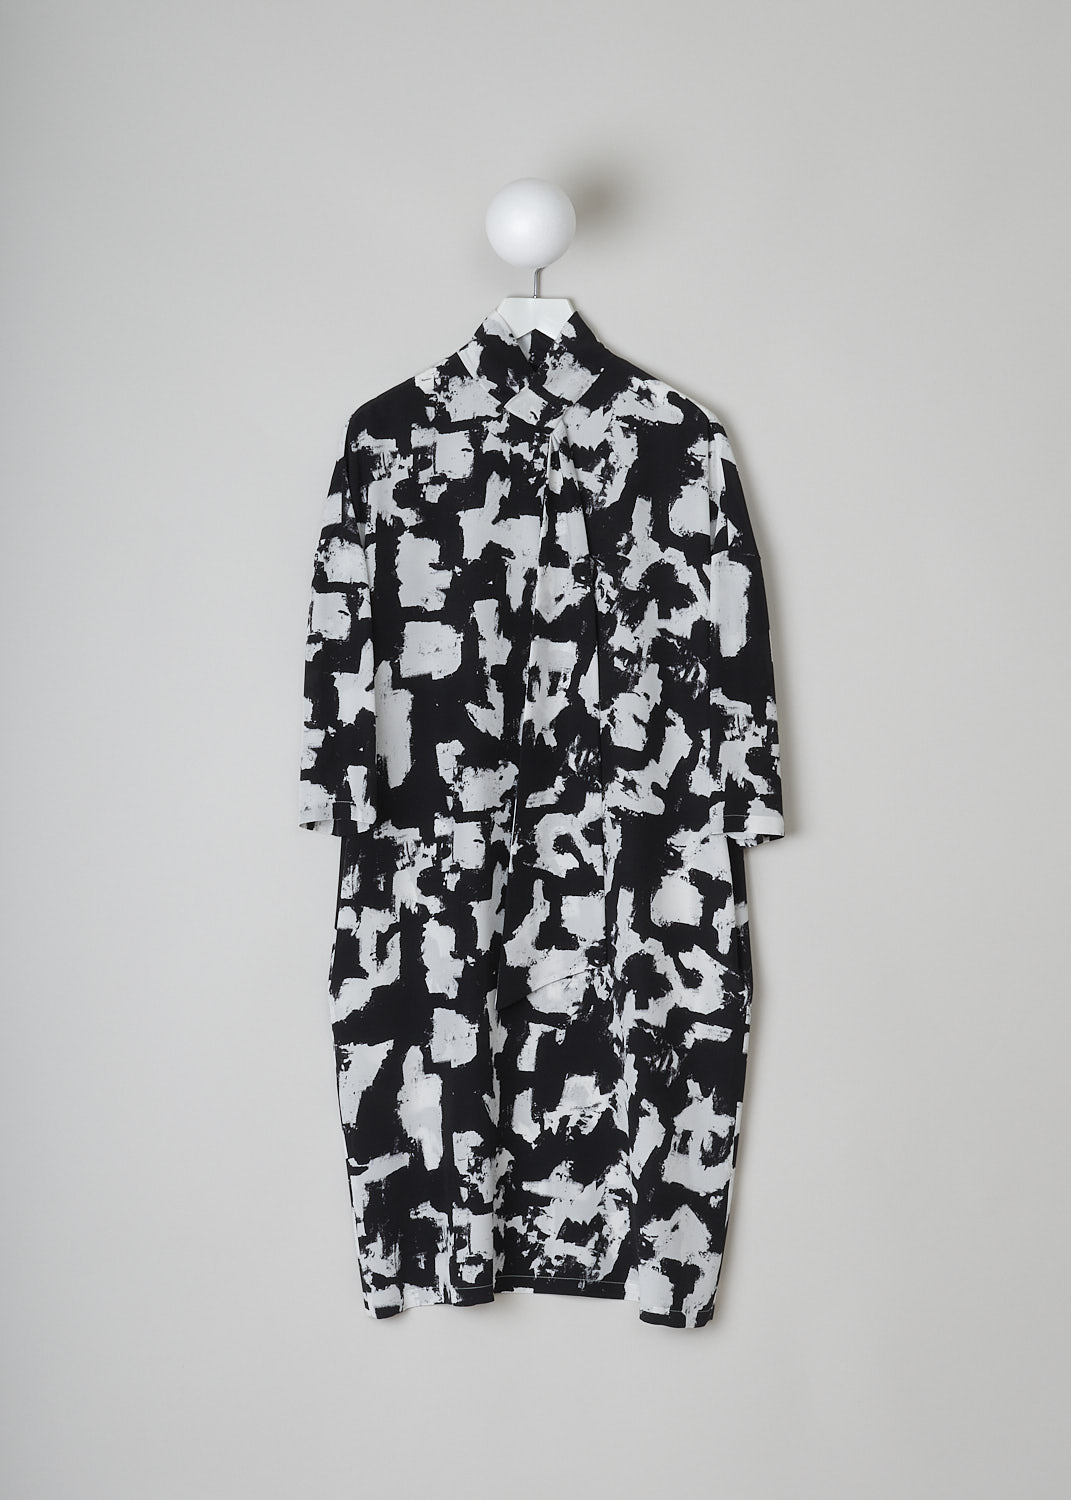 ASPESI, BLACK AND WHITE MIDI DRESS, 2992_V126_62241, Black, White, Print, Front, This black and white printed midi dress has a high-neck with an incorporated tie detail. The dress has dropped shoulders with three-quarter sleeves. Concealed slanted pockets can be found on-seam. The dress has a straight hemline.
